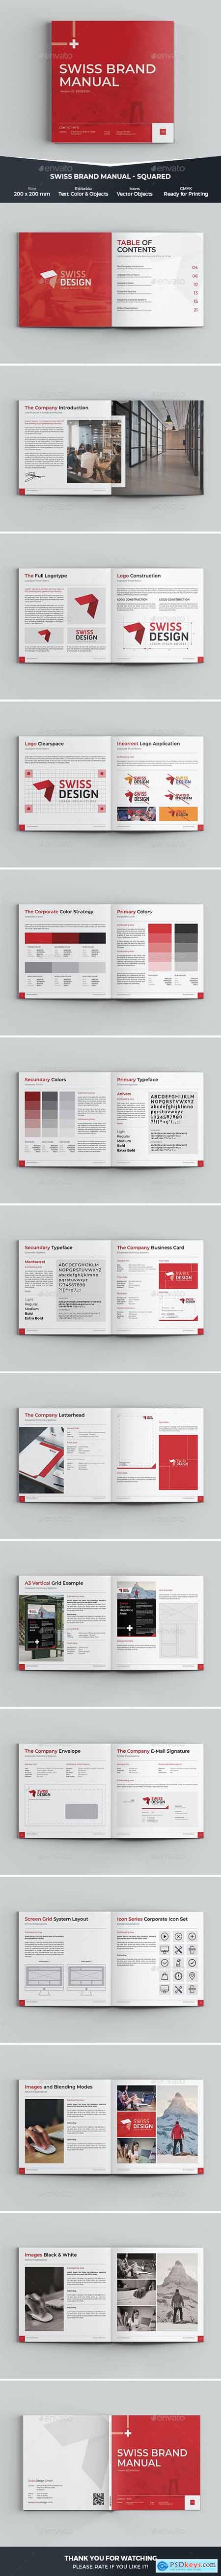 Brand Manual - Brand Guidelines - Squared 28481606